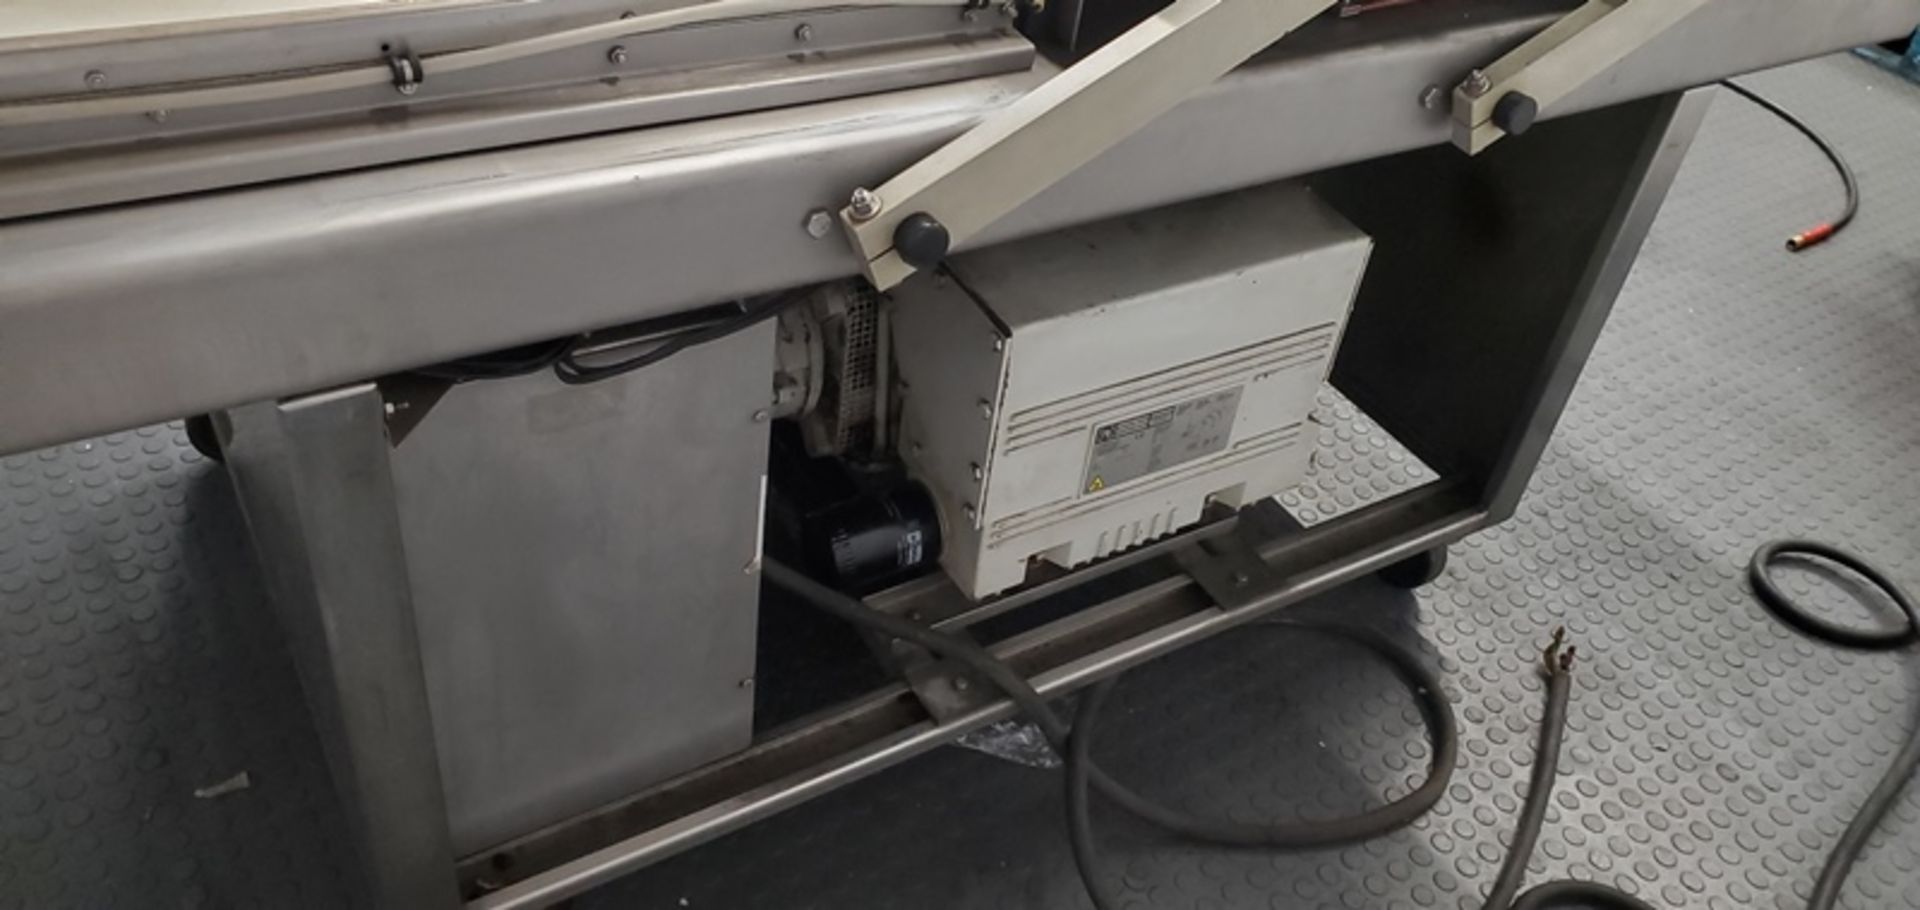 Sipromac Mdl. 650A Double Chamber Vacuum Packaging Machine, Ser. #02353, 208V/3PH/60Hz, missing some - Image 6 of 10